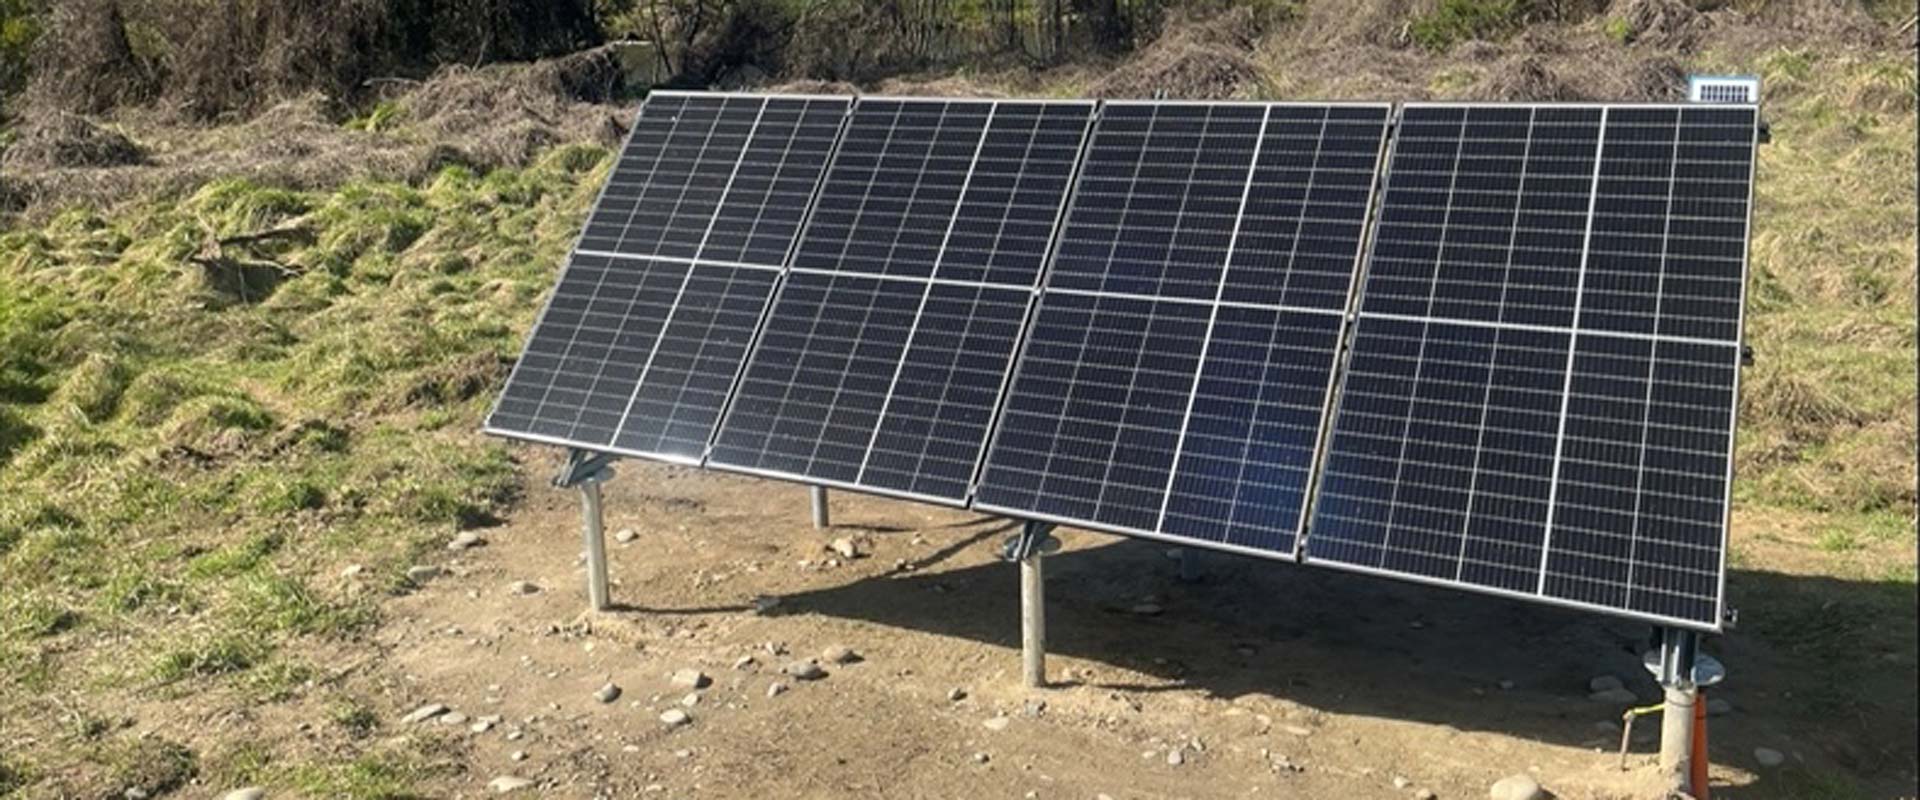 Solar water pumps for your rural location.